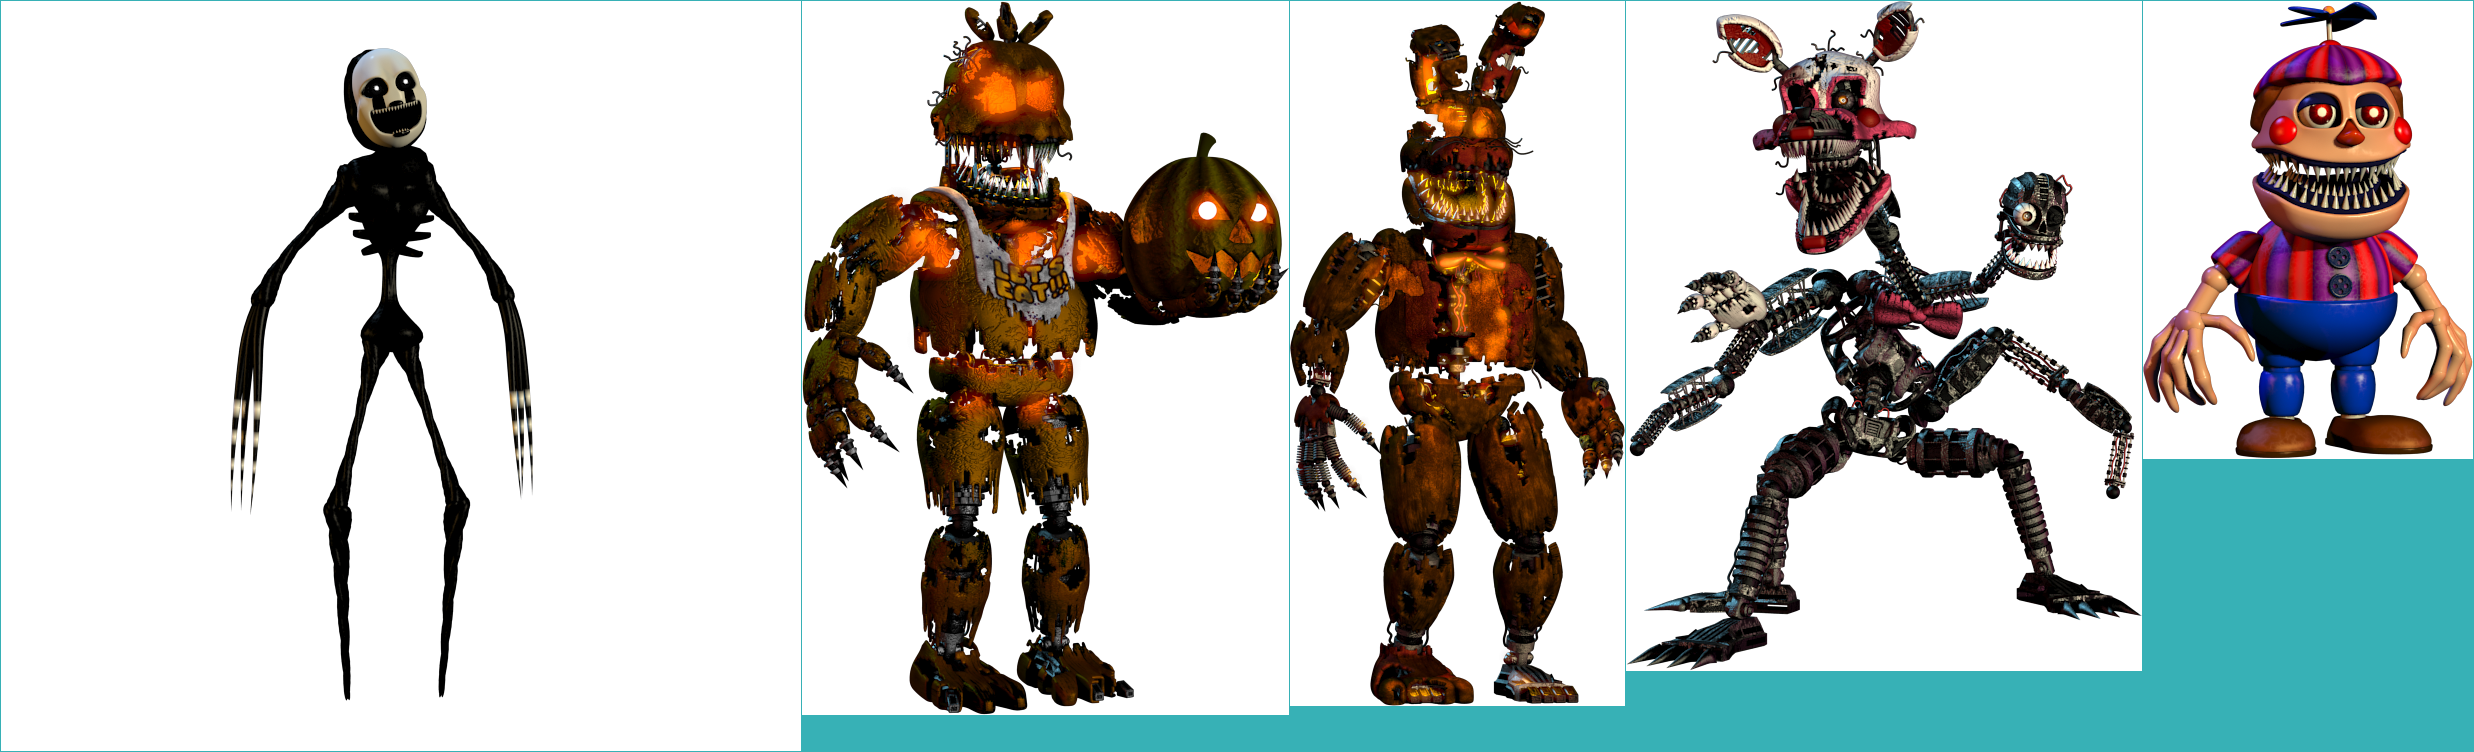 PC / Computer - Five Nights at Freddy's 4 - Nightmare - The Spriters  Resource